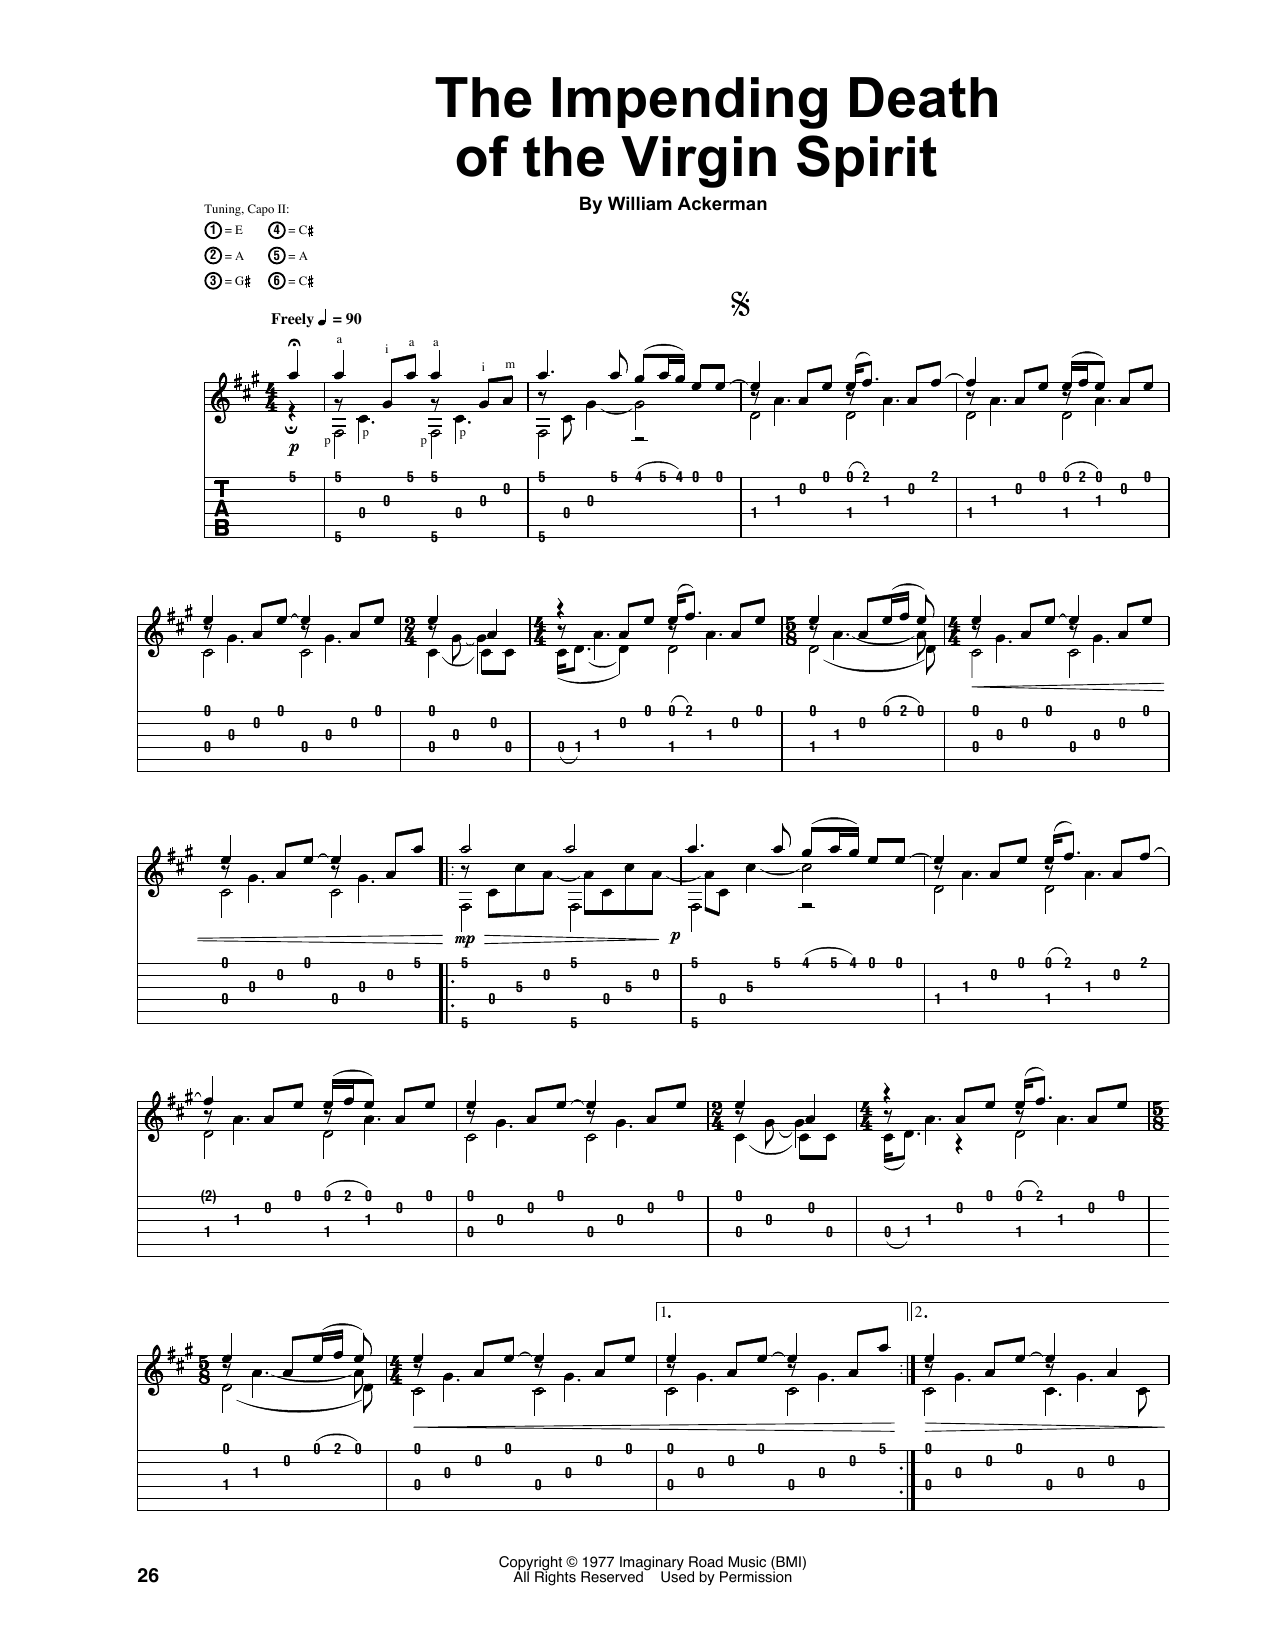 Download Will Ackerman The Impending Death Of The Virgin Spiri Sheet Music